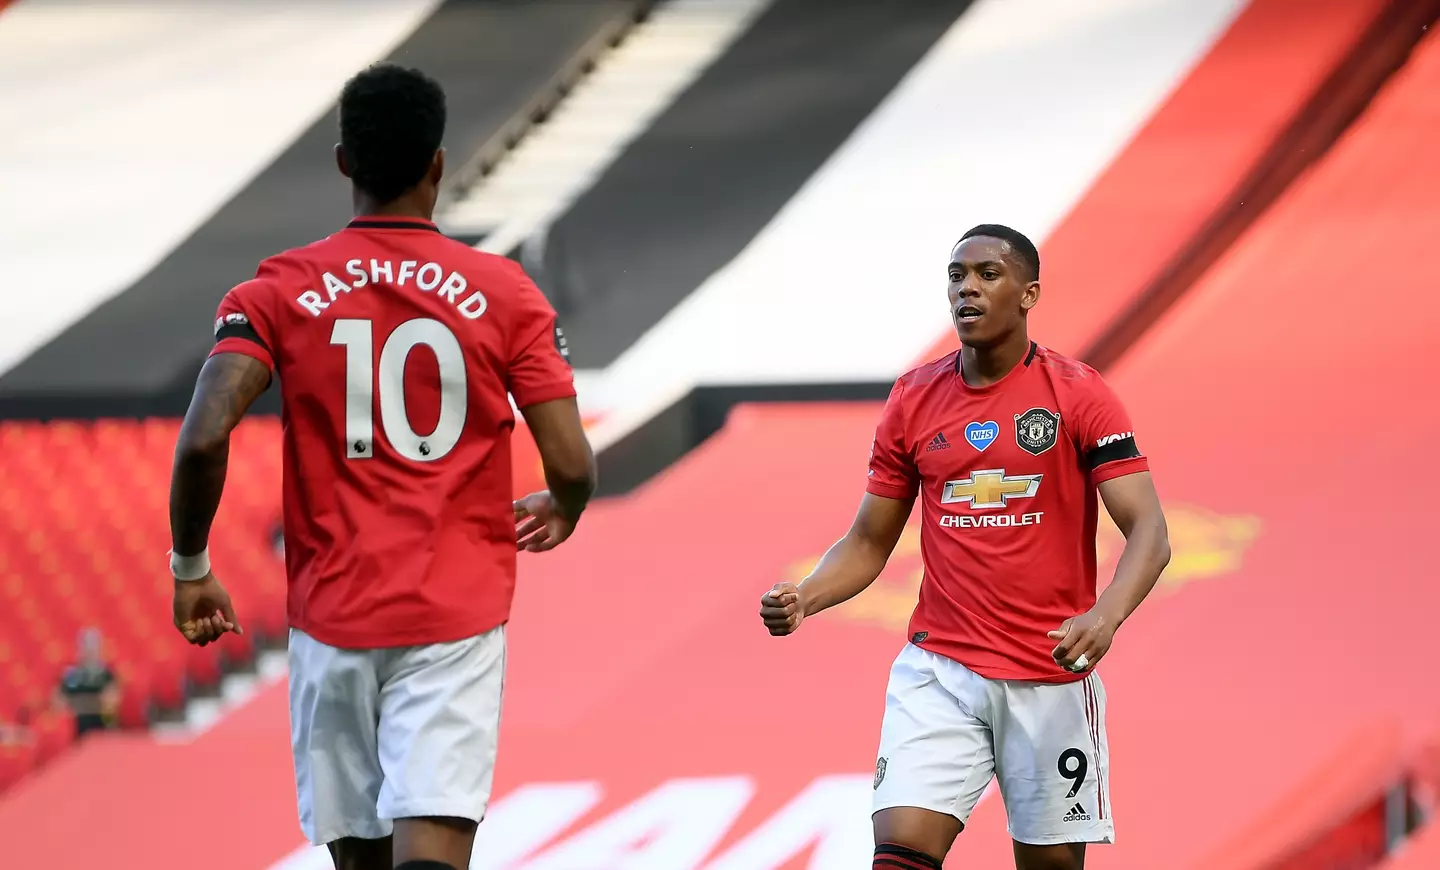 Martial and Rashford, along with Greenwood, made a good front three at the end of the 2019/20 season. Image: PA Images